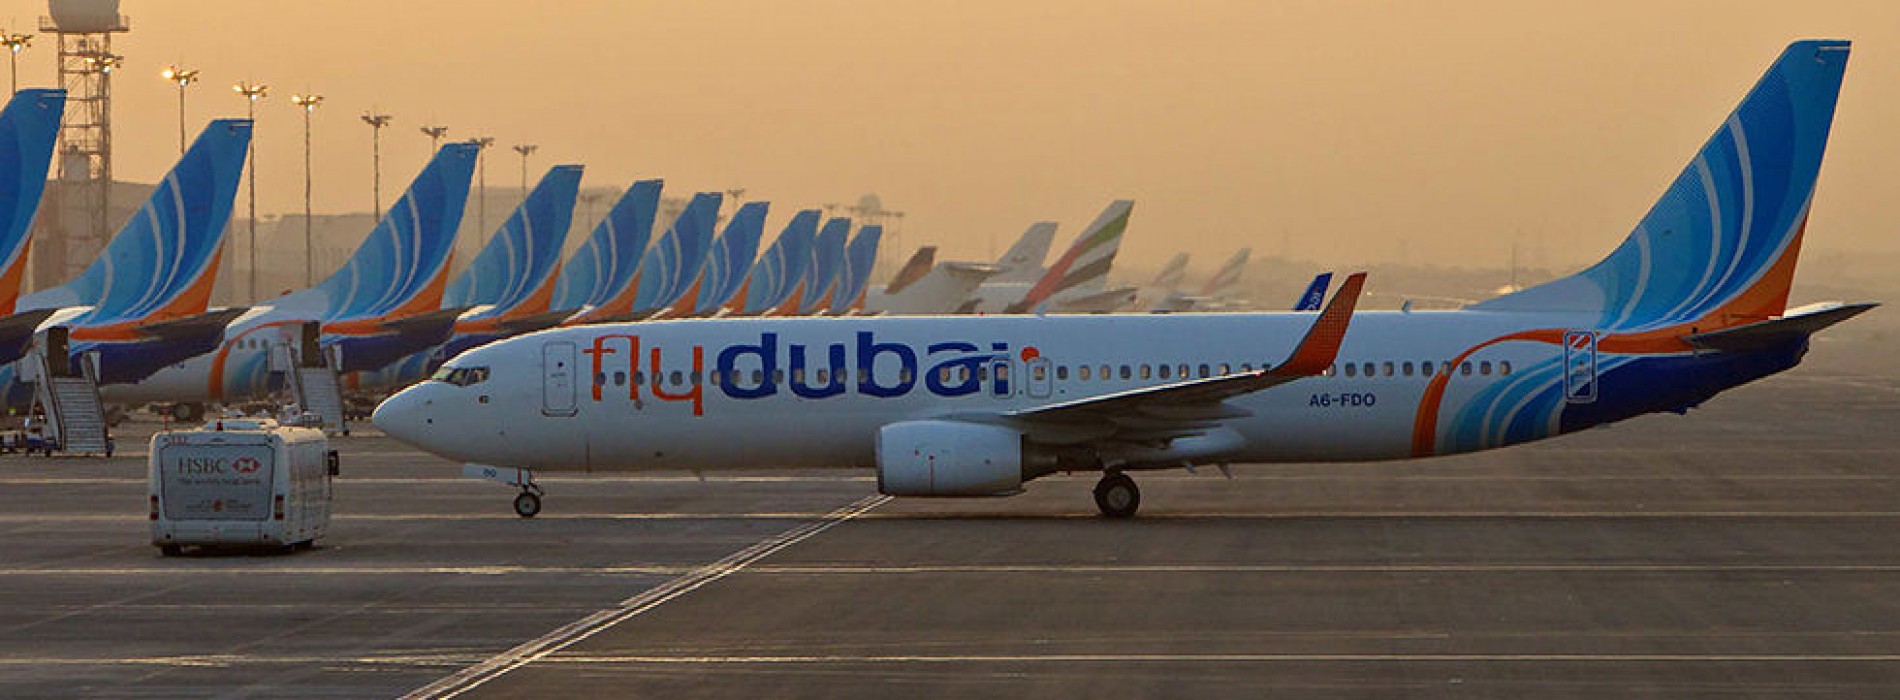 flydubai’s network in Russia expands to ten destinations